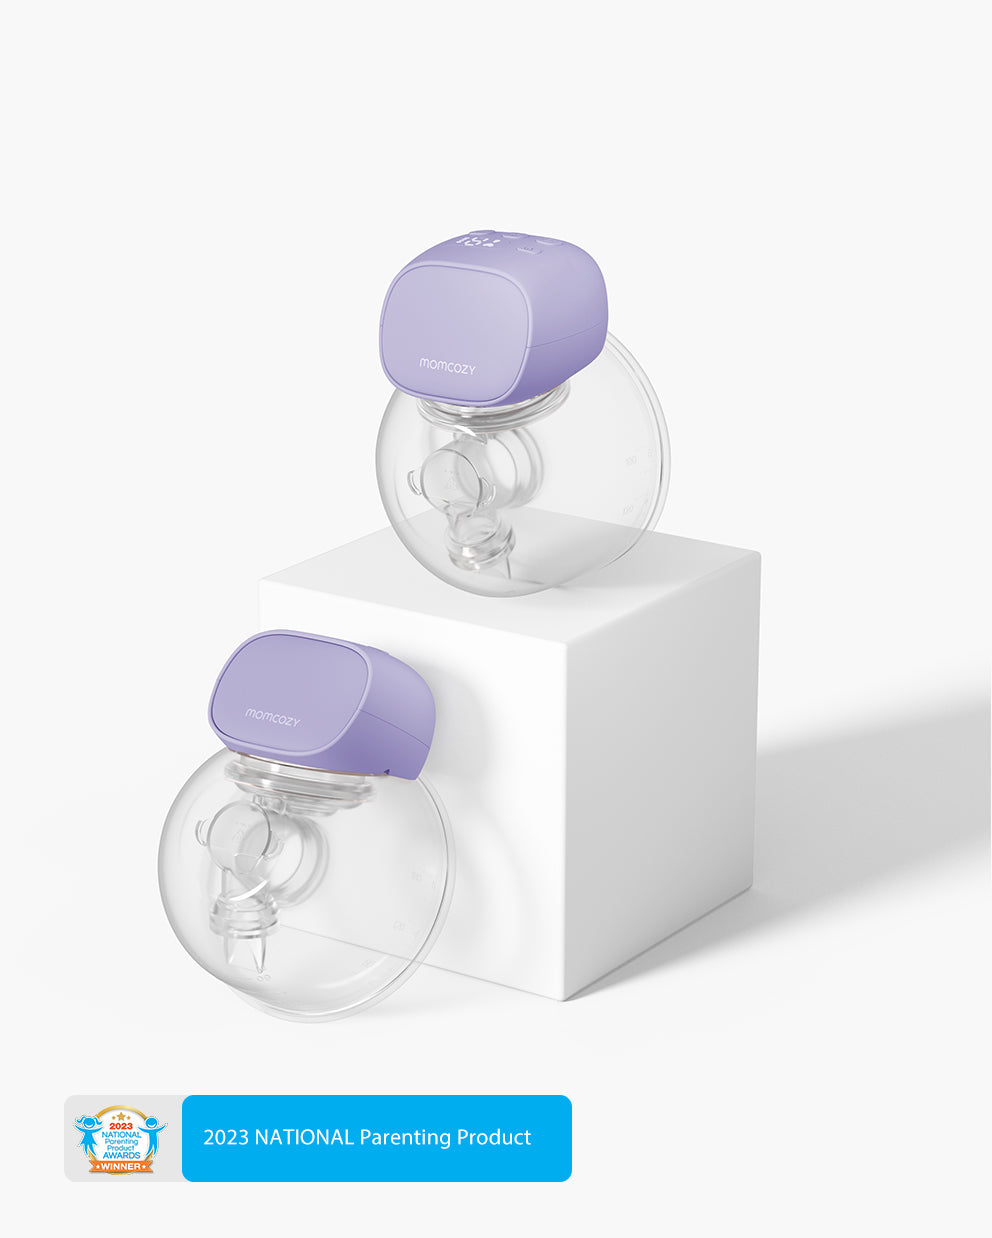 Momcozy S9 Pro Wearable Breast Pump, Long Battery Life & LED